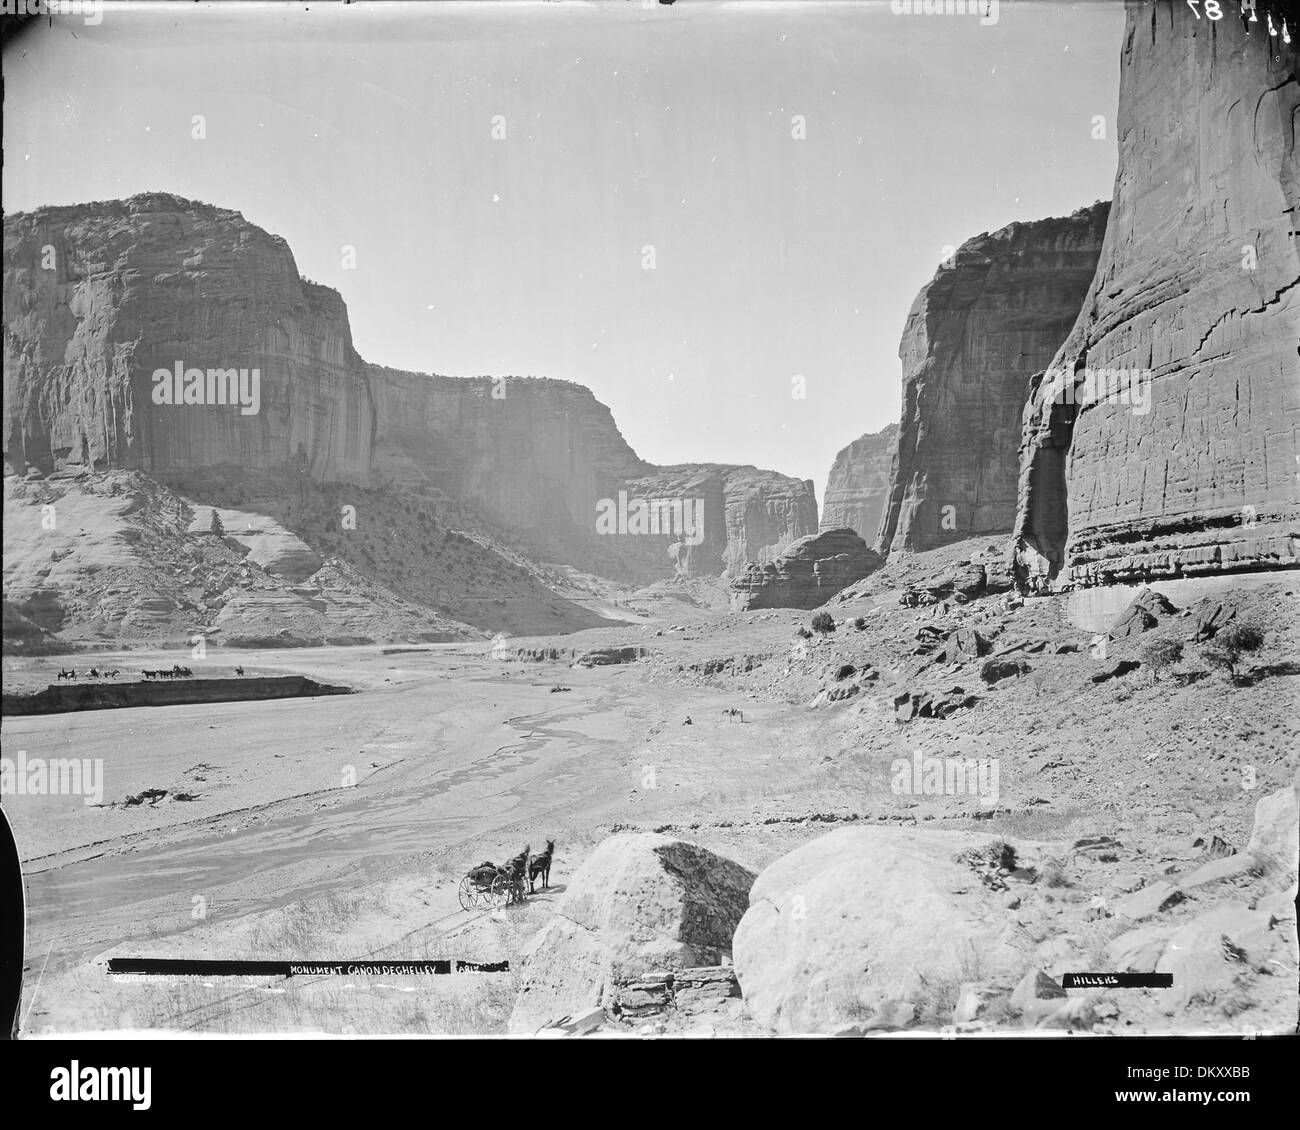 (Old No. 114) Monument Canyon De Chelly, Arizona. Hillers photo. A man is standing beside a two-horse wagon in center... 517761 Stock Photo